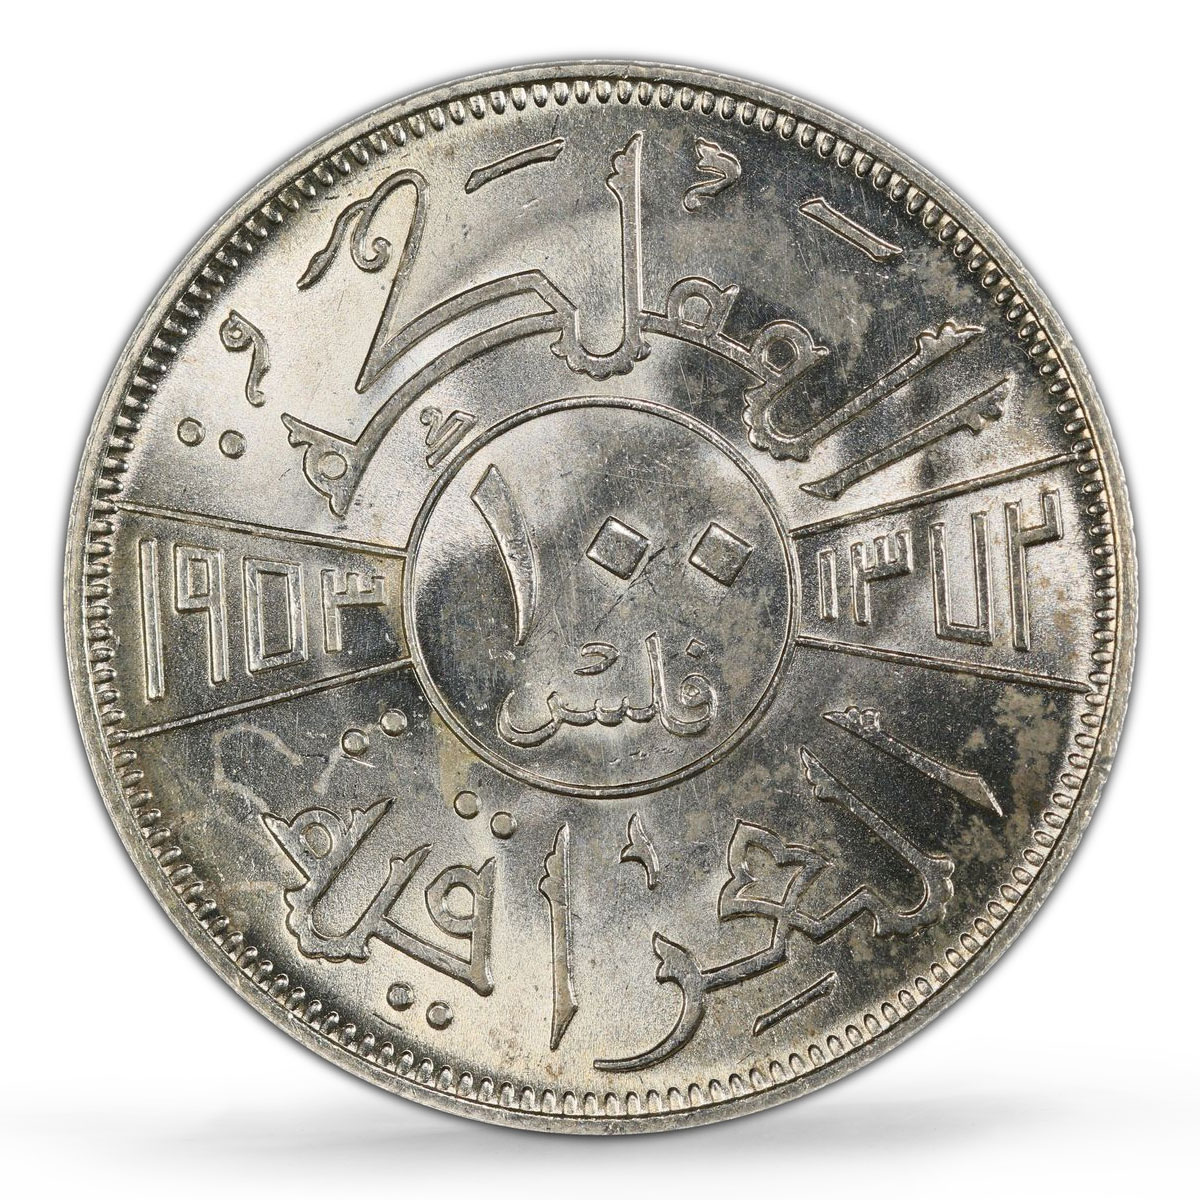 Iraq 100 fils Faisal II Coinage Coat of Arms Genuine 95 PCGS silver coin 1953